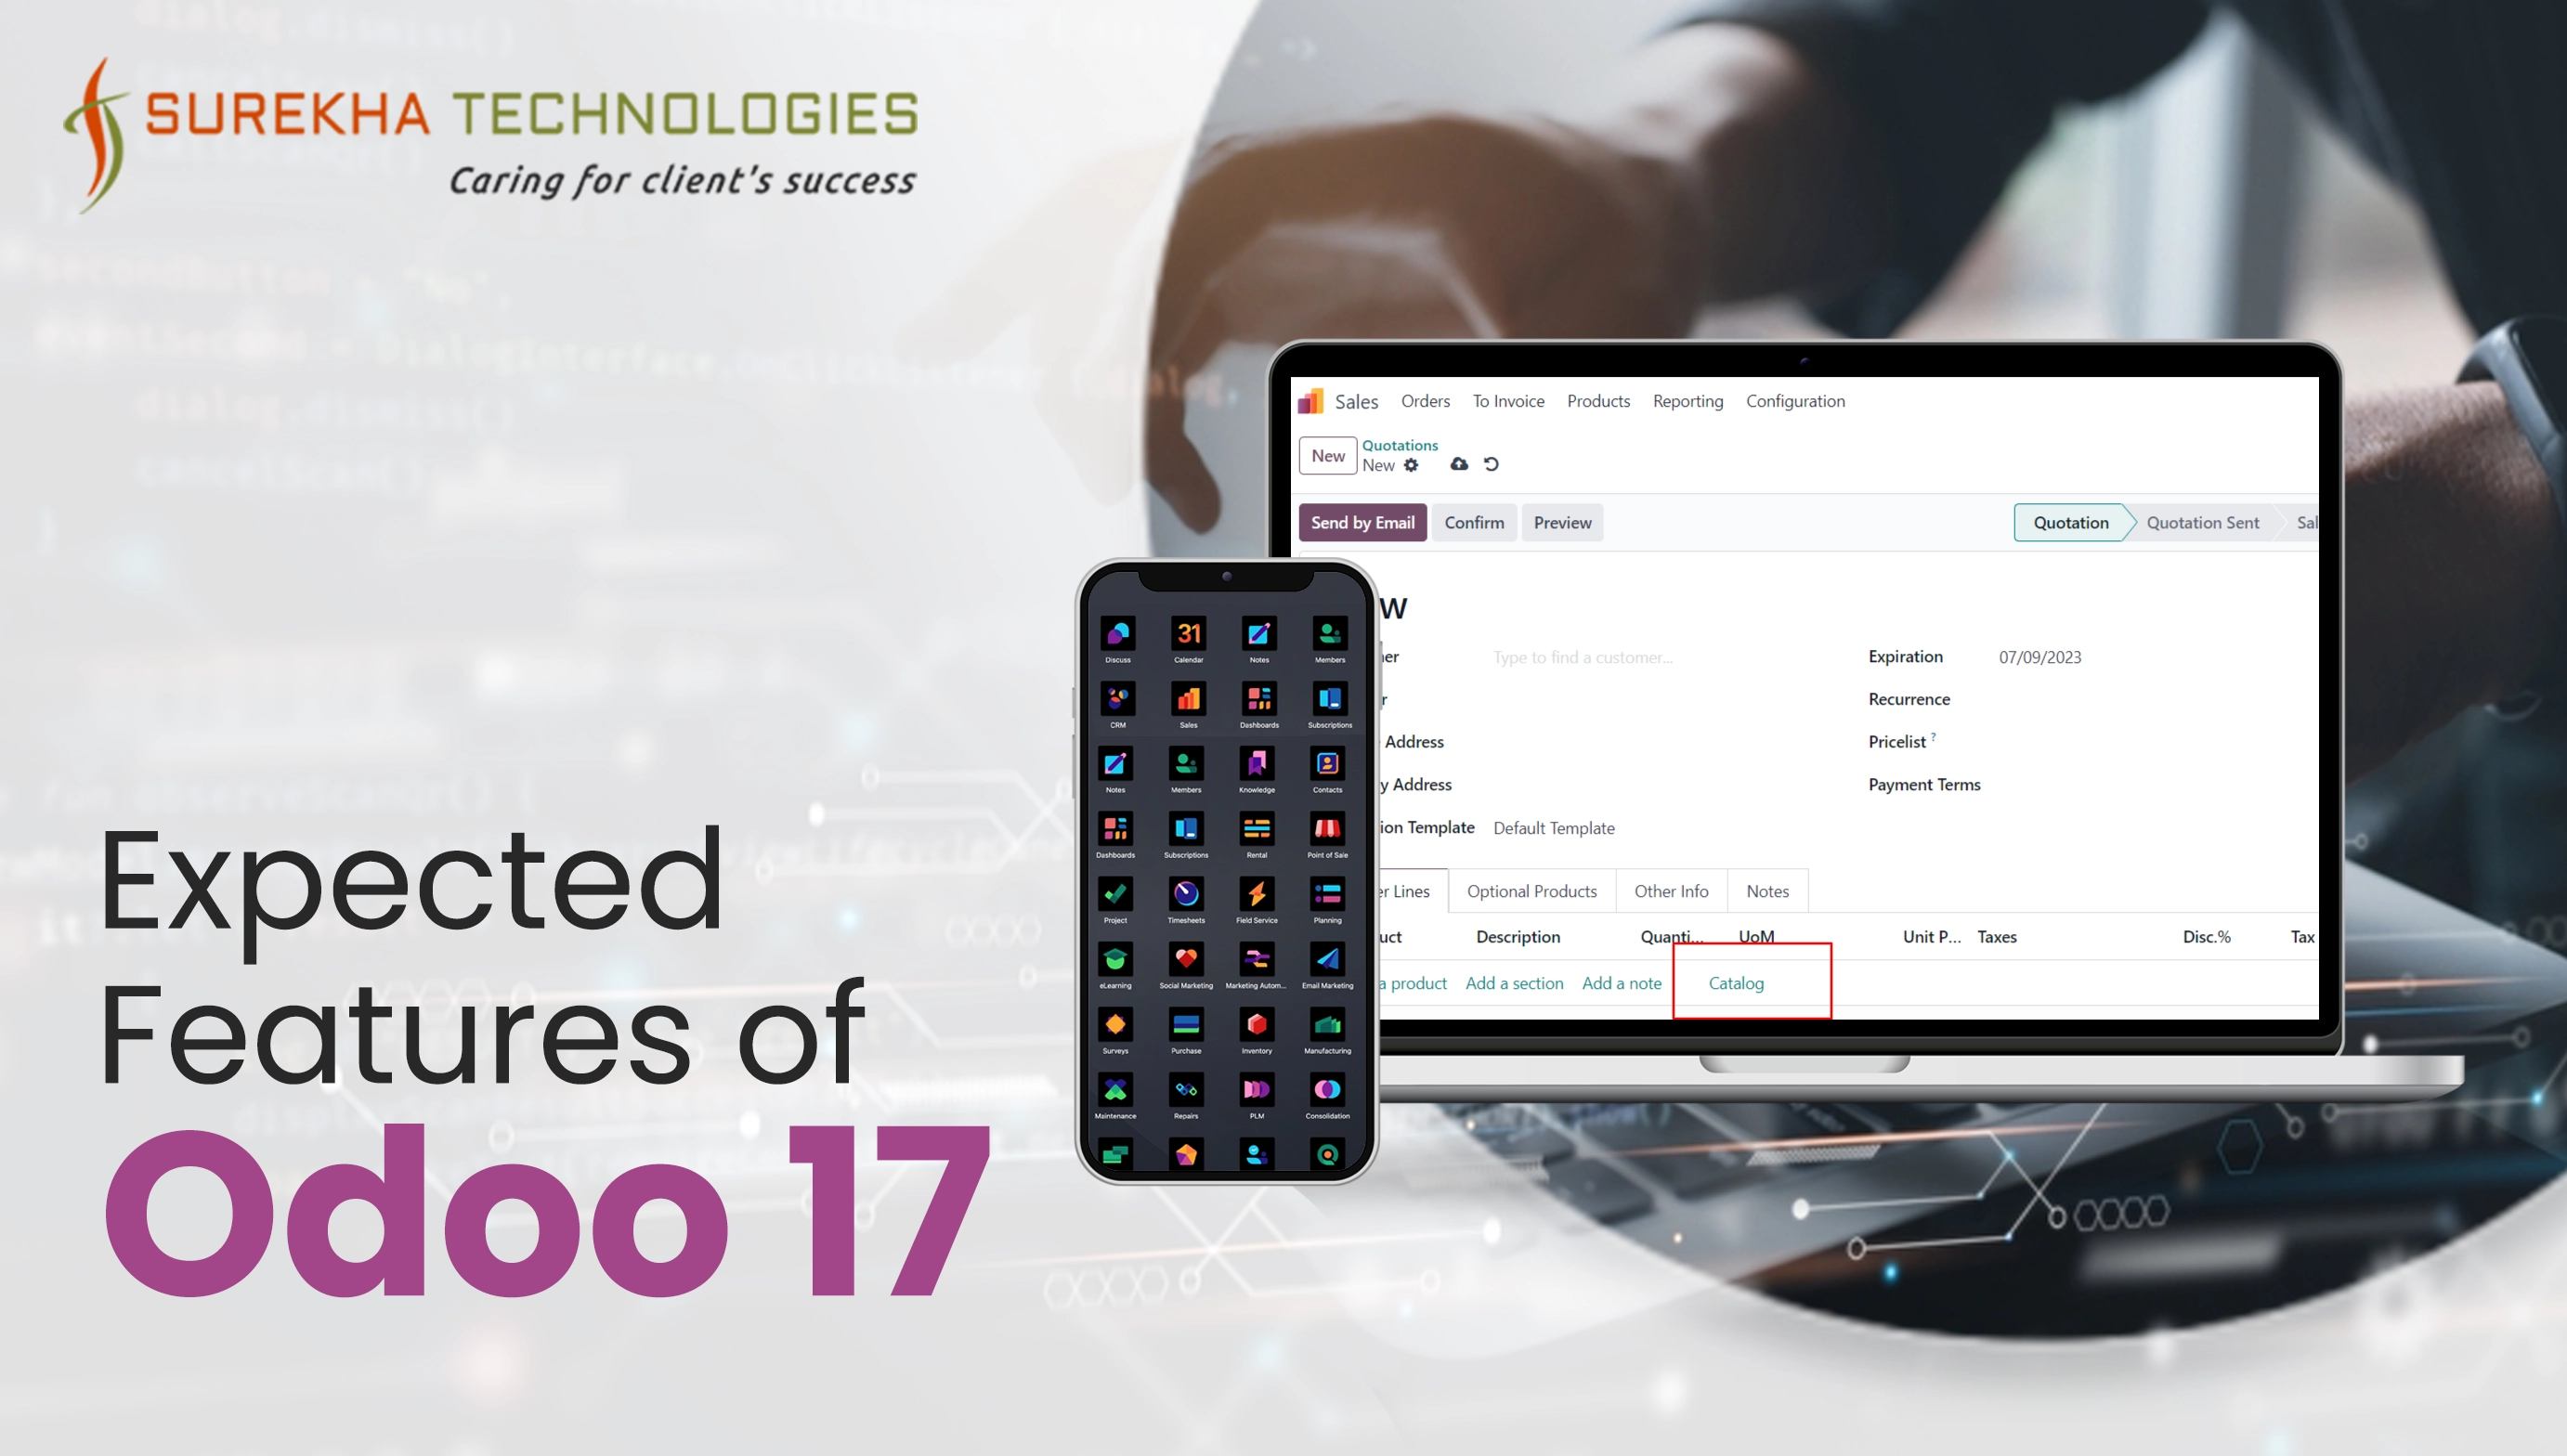 Expected features of Odoo 17